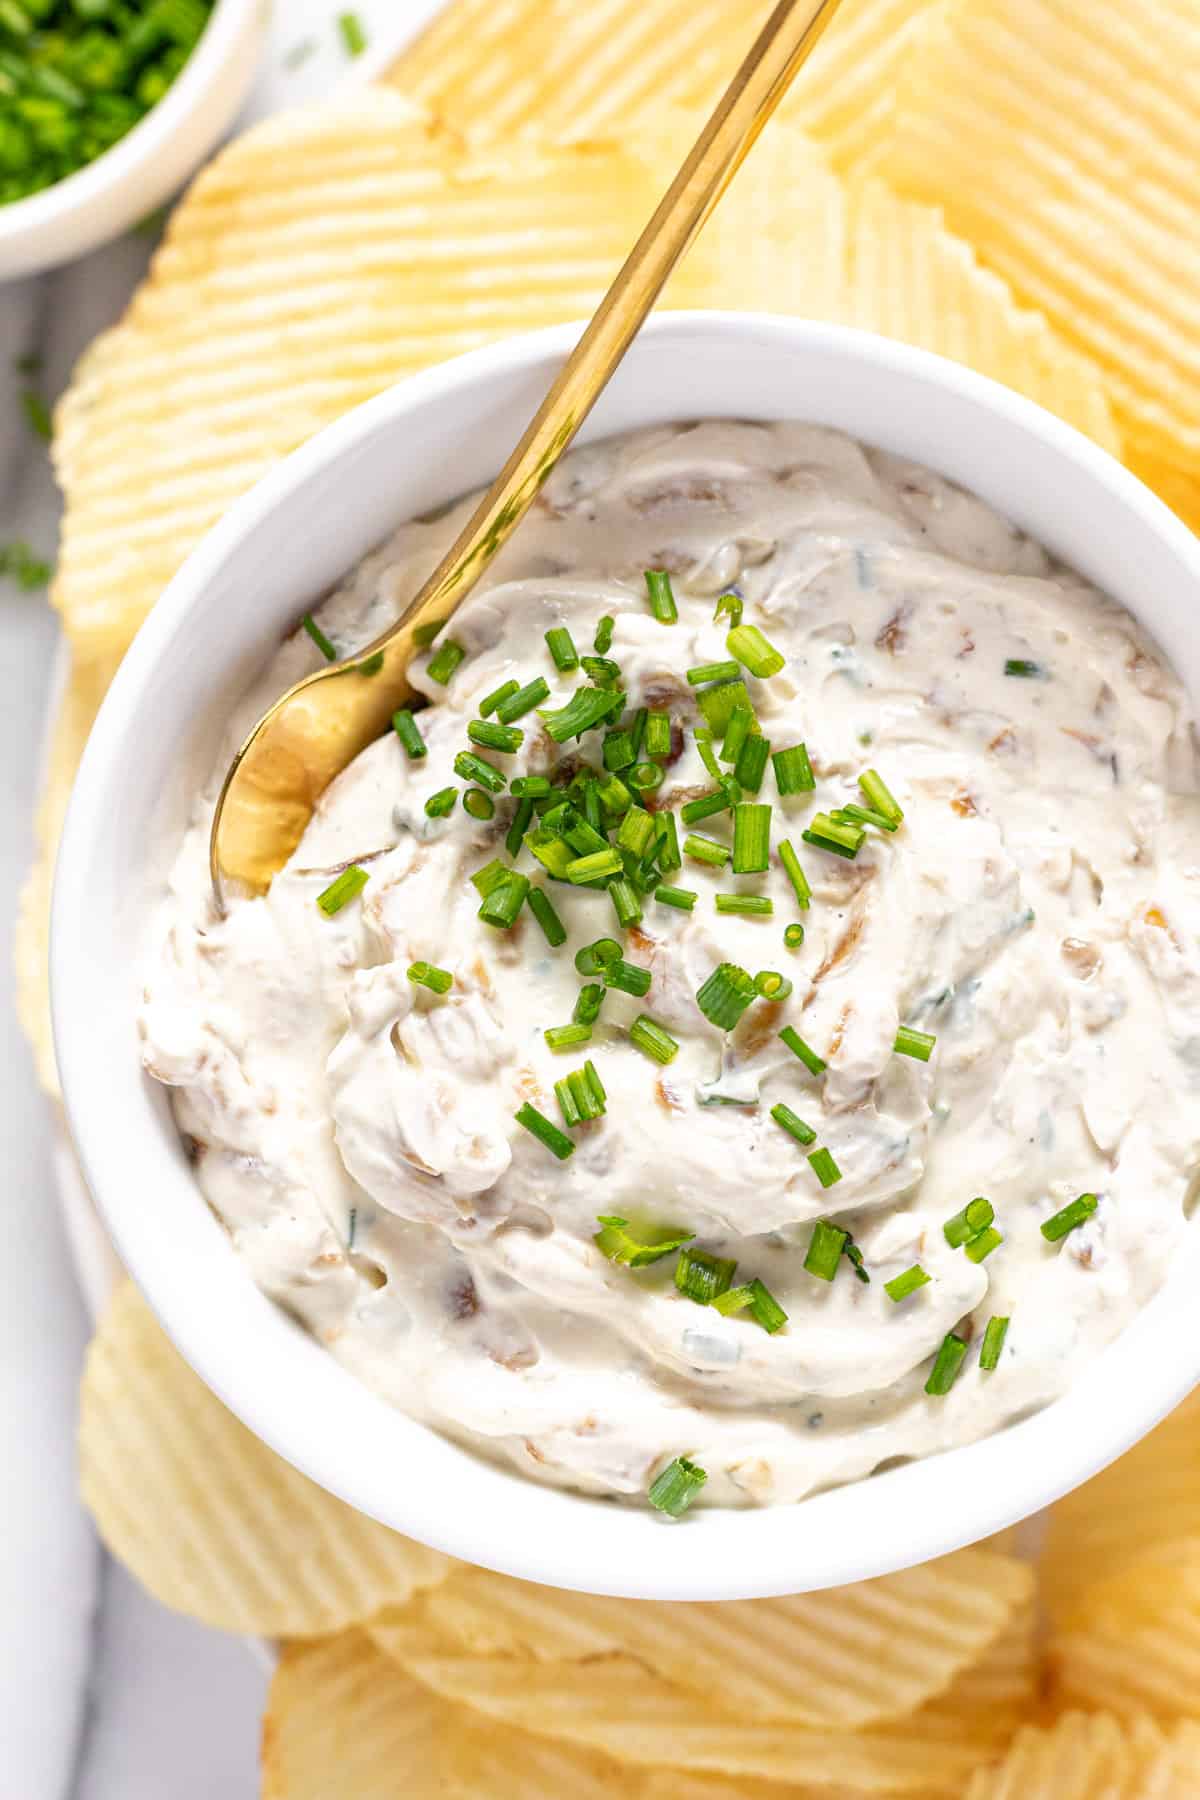 Savory Spice Seven Onion Dip Mix 3 Count